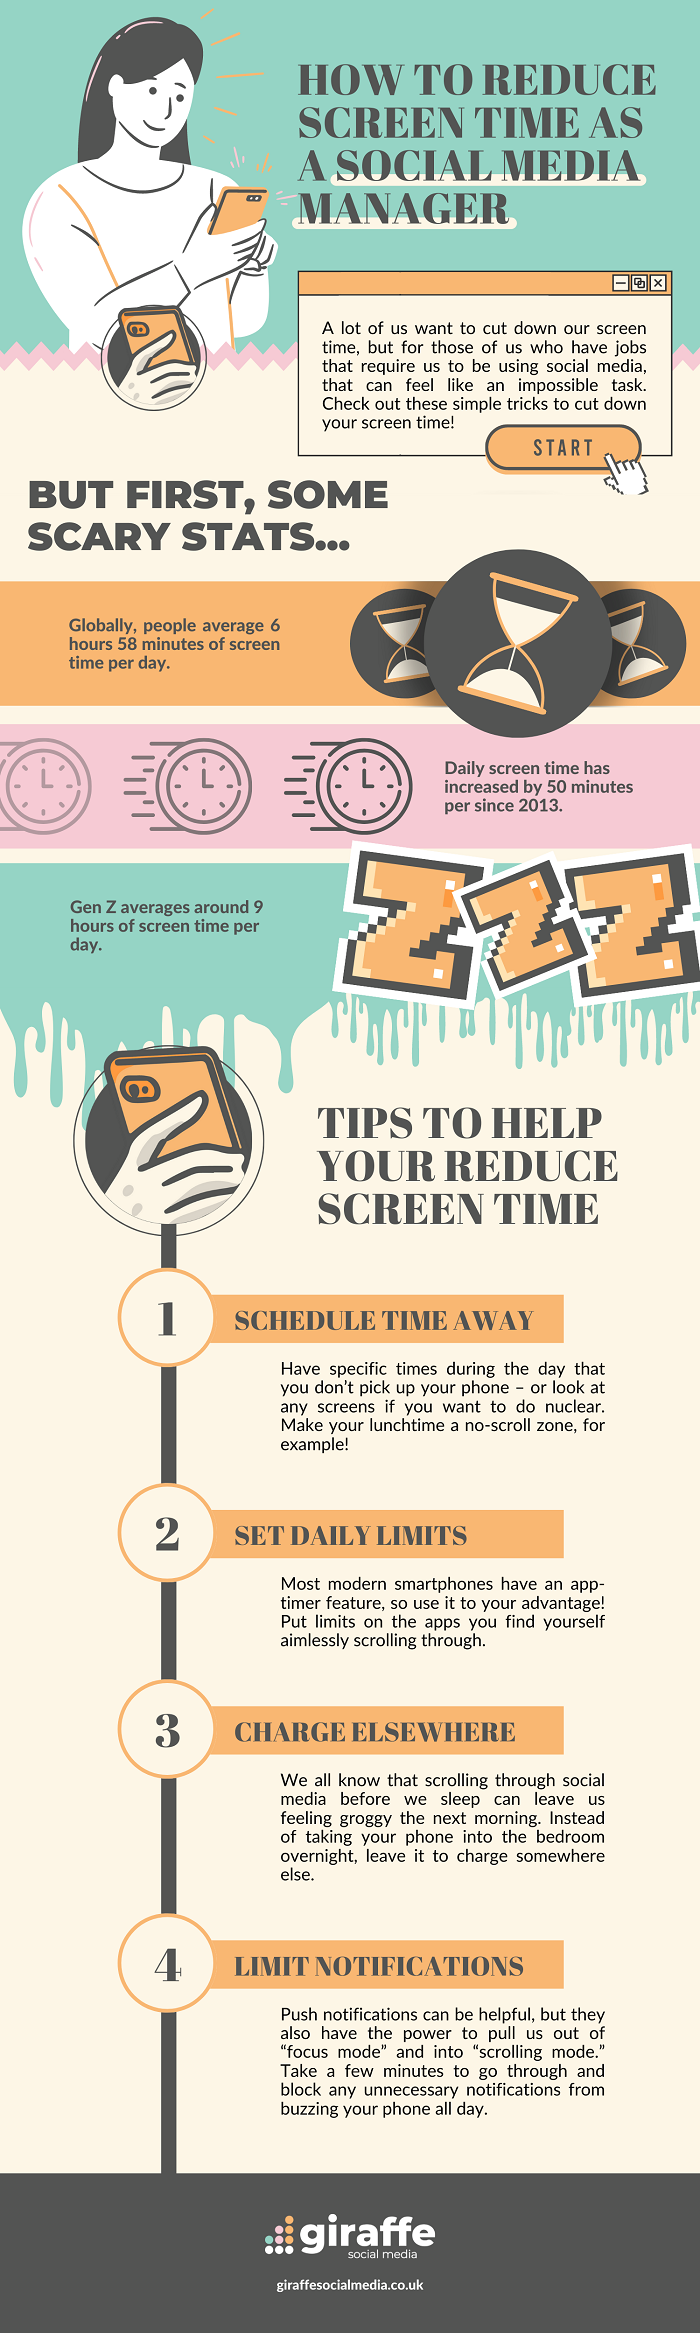 How to reduce screen time infographic